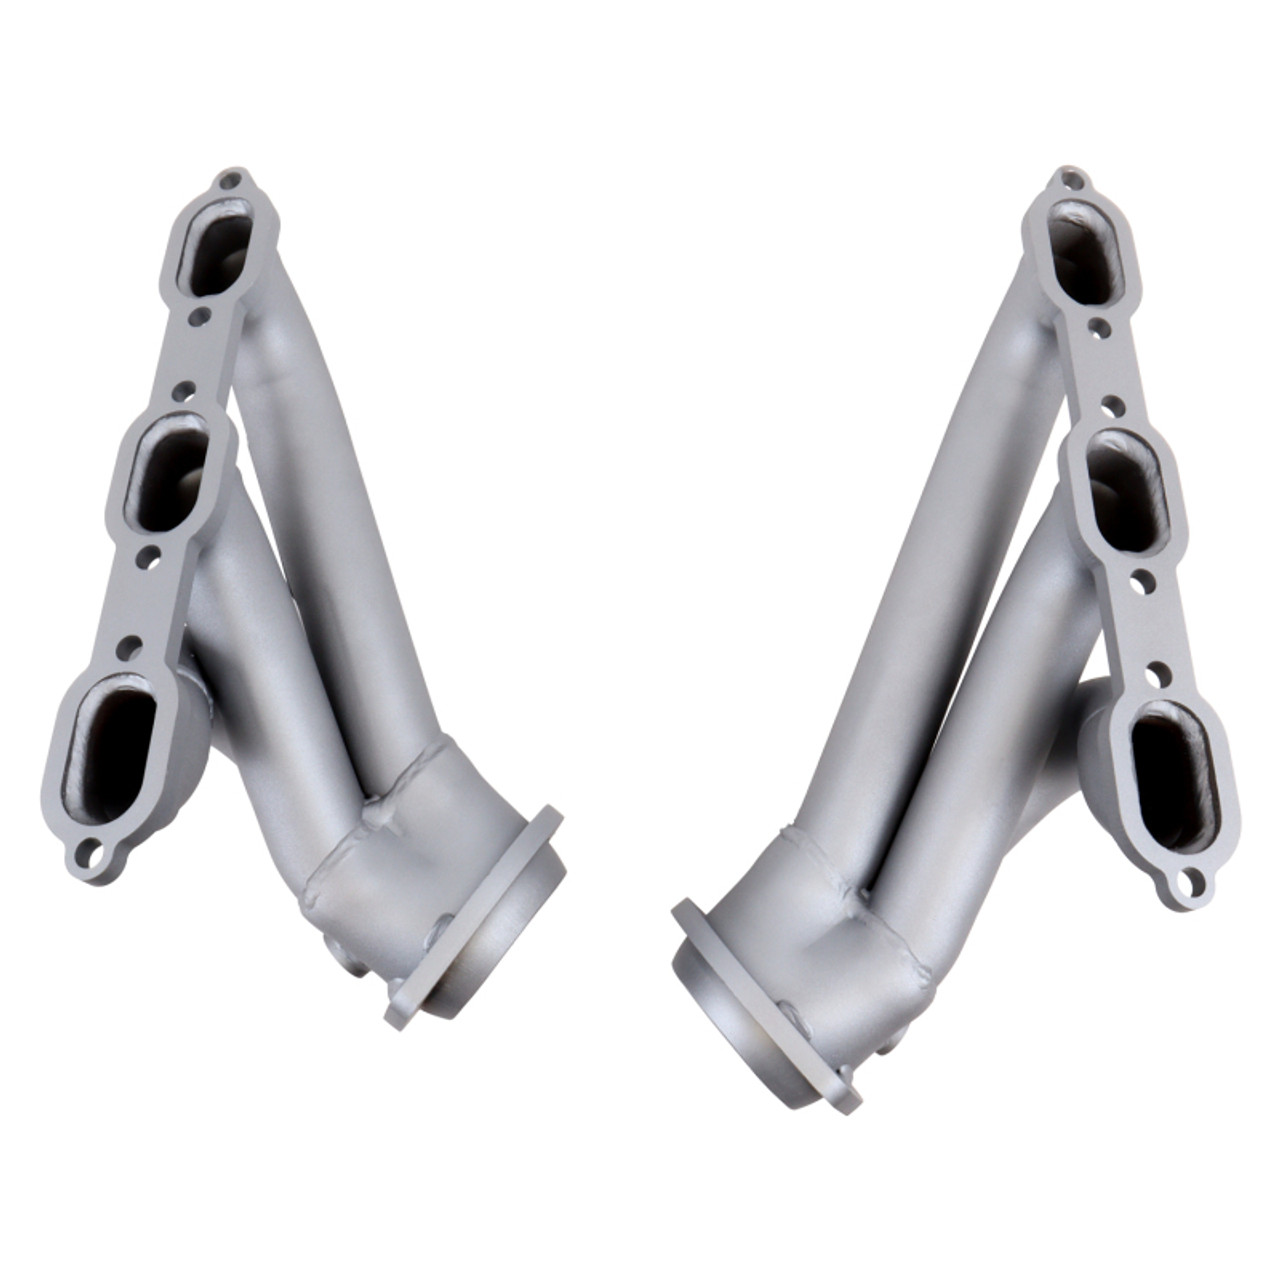 BBK 06-10 Dodge Charger / Chrysler 300 3.5L V6 1-5/8 Shorty Tuned Length Headers - Titanium Ceramic - 4040 Photo - out of package